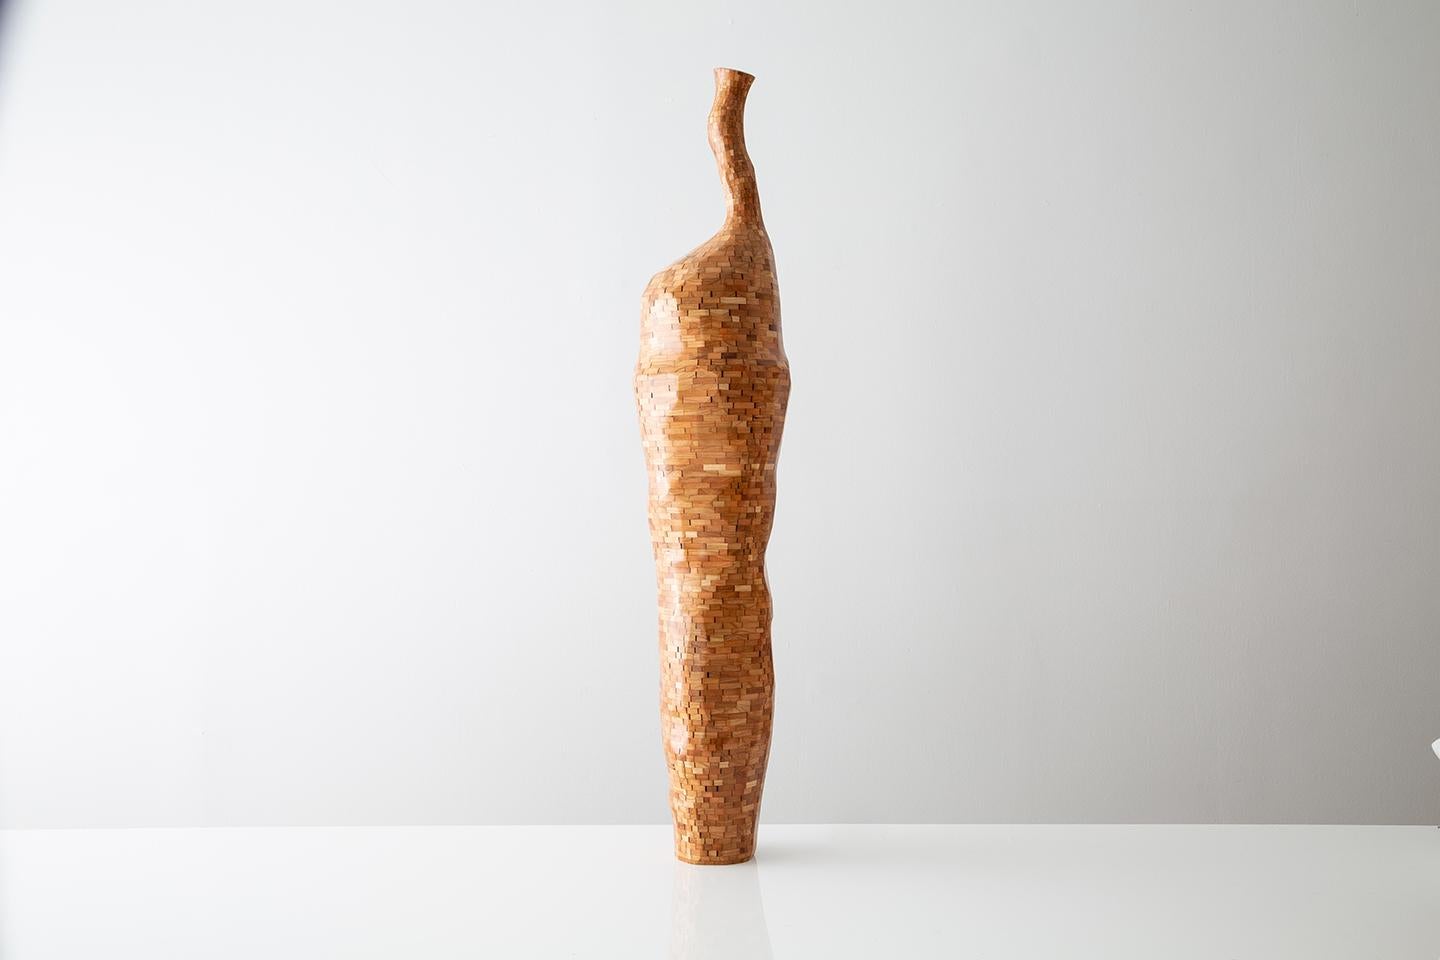 Hand-Carved Tall STACKED Faceted Organic Cherry Vase, by Richard Haining, Available Now